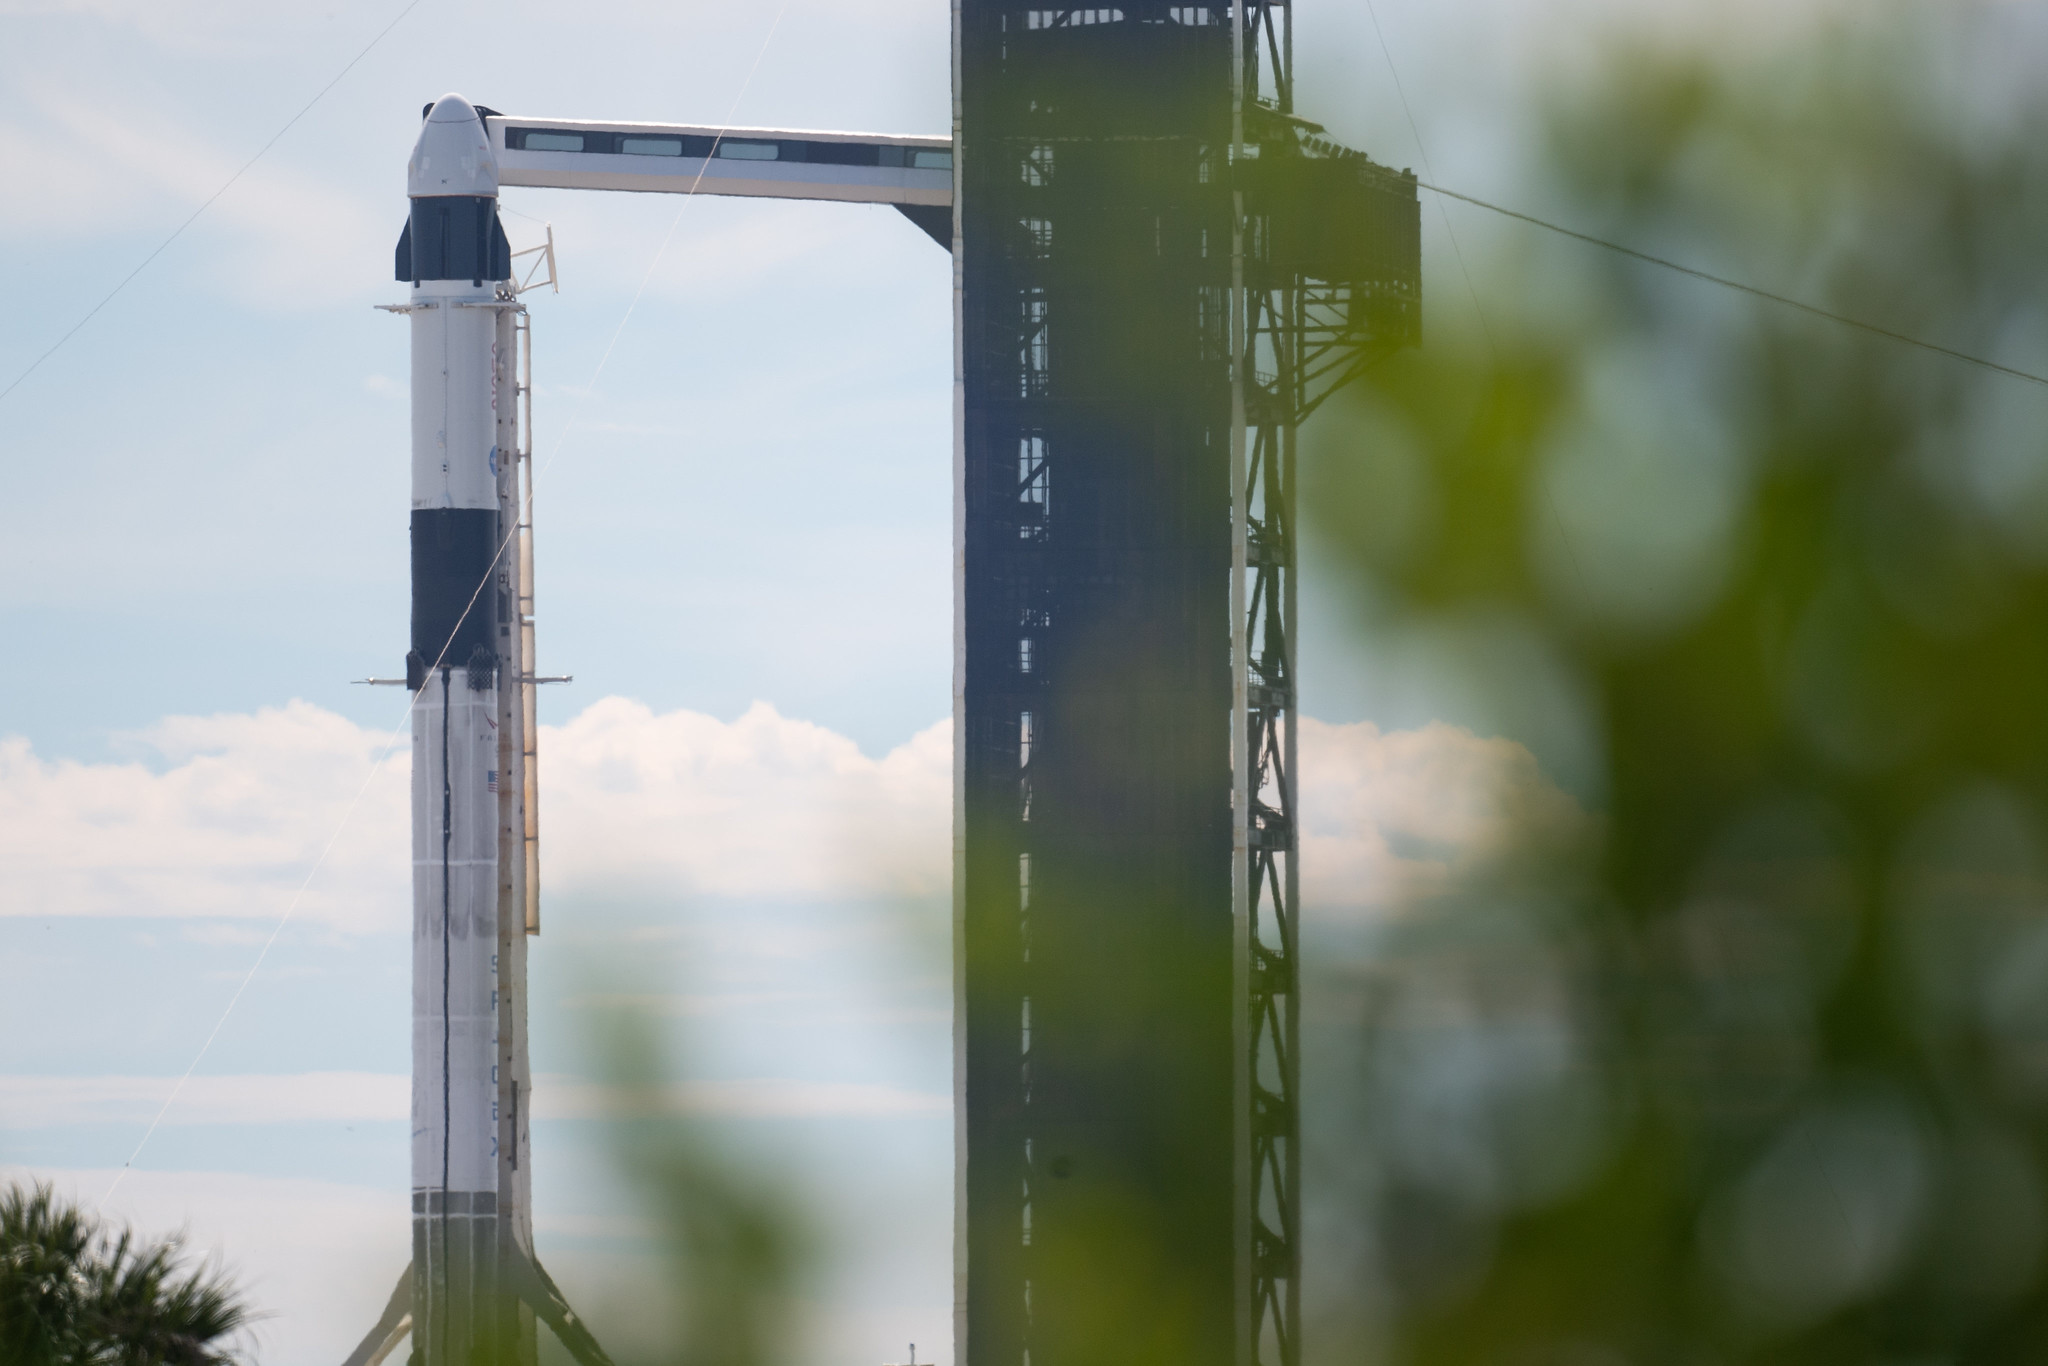 A SpaceX Falcon 9 rocket is rolled out to the launch pad ready to launch the Crew-3 mission.